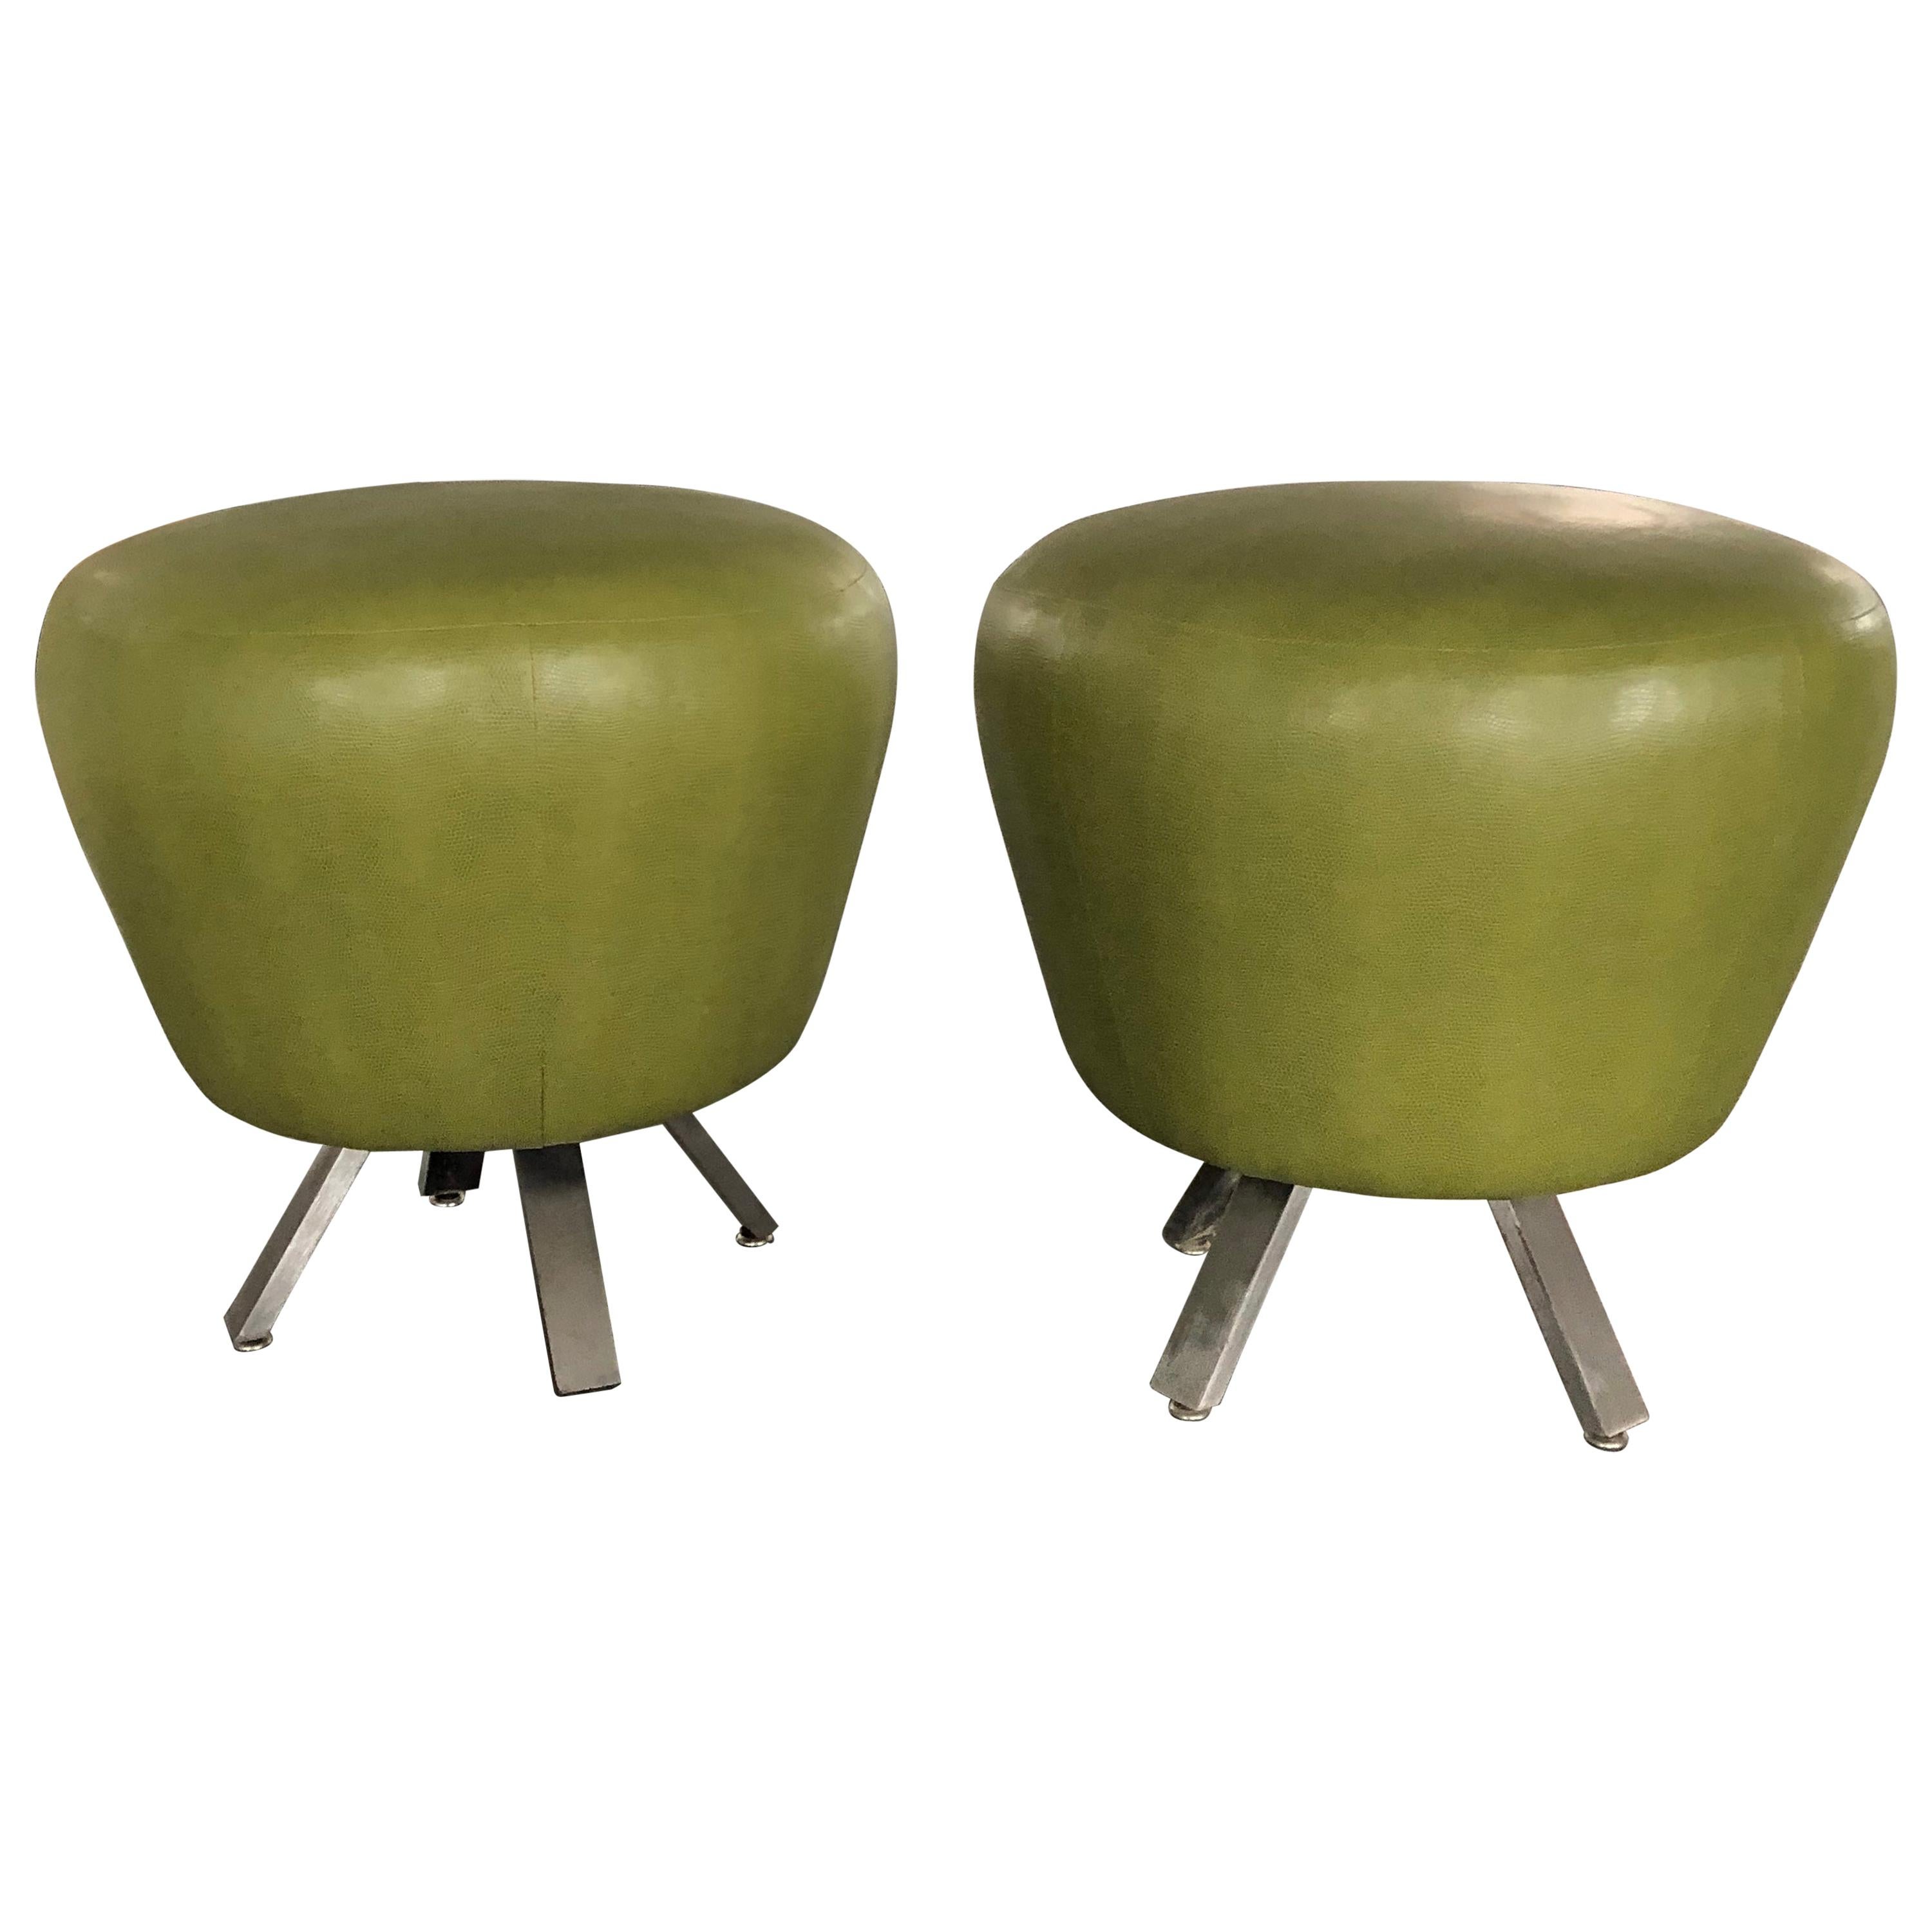 Whimsical Pair of "Gumdrop" Stools with Brushed, Splayed Aluminum Feet